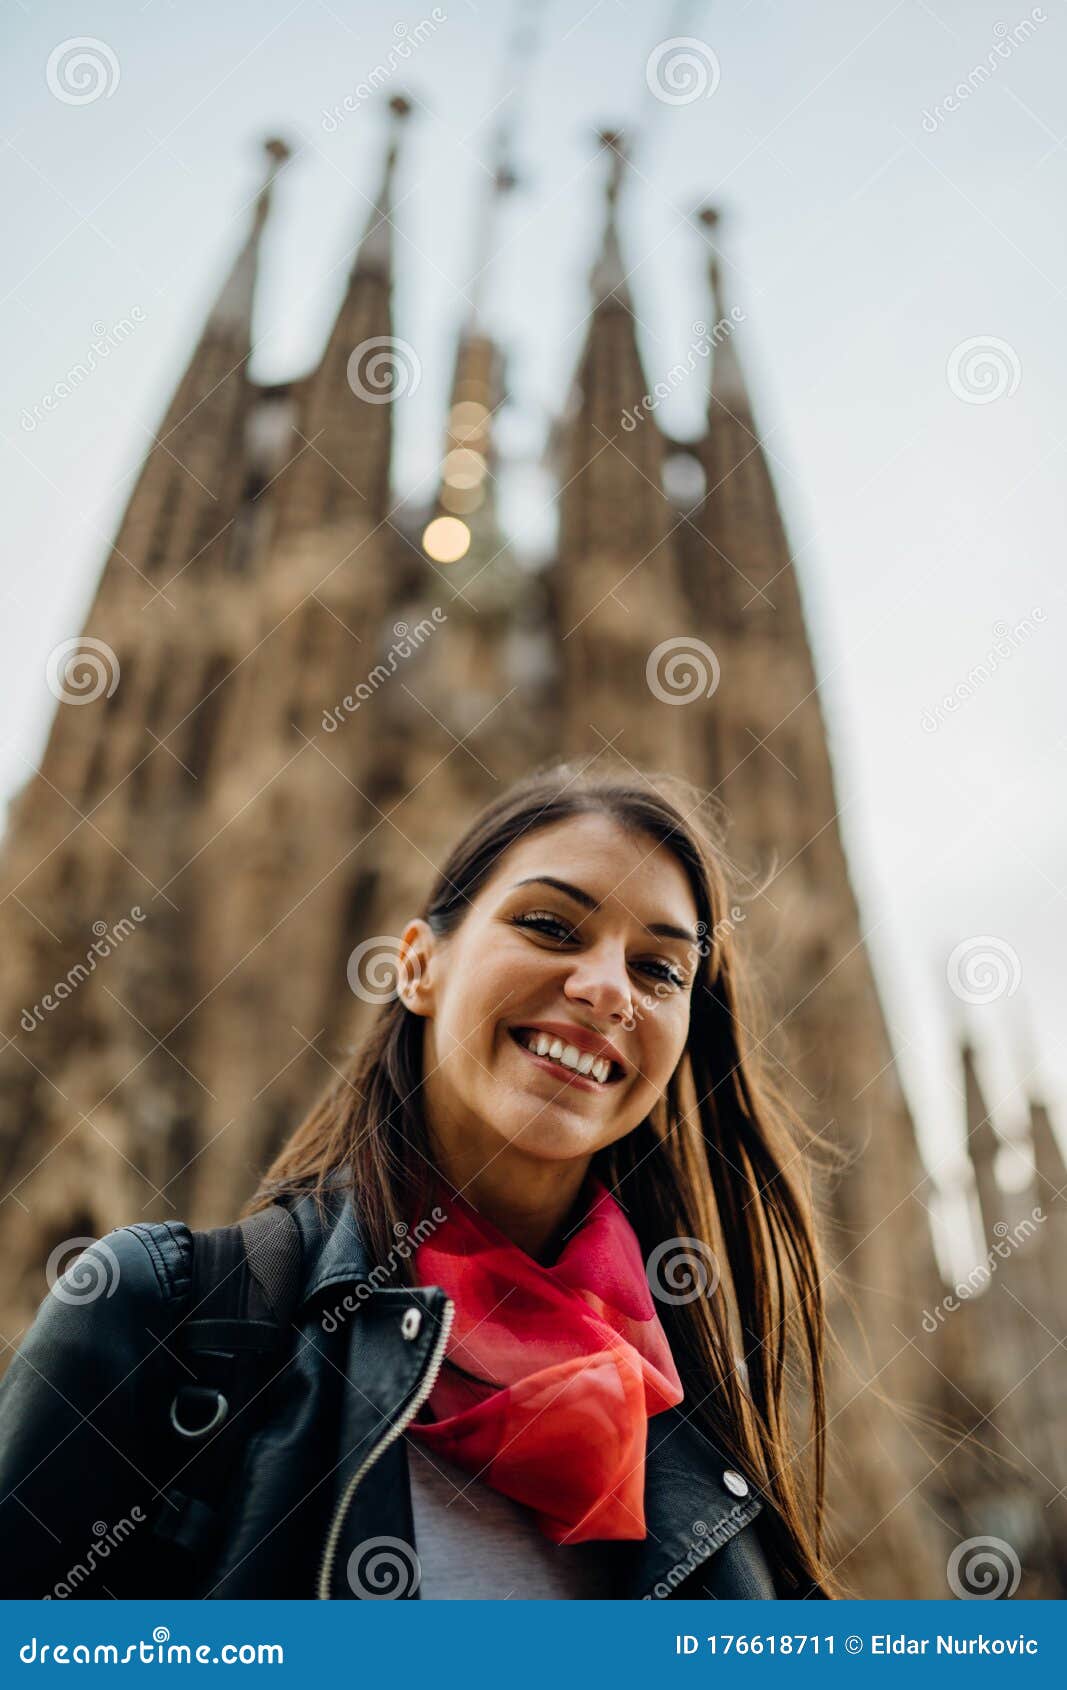 barcelona,spain-march 12 : smiling spanish woman visiting famous landmarks and attractions,gothic church sagrada familia,in center